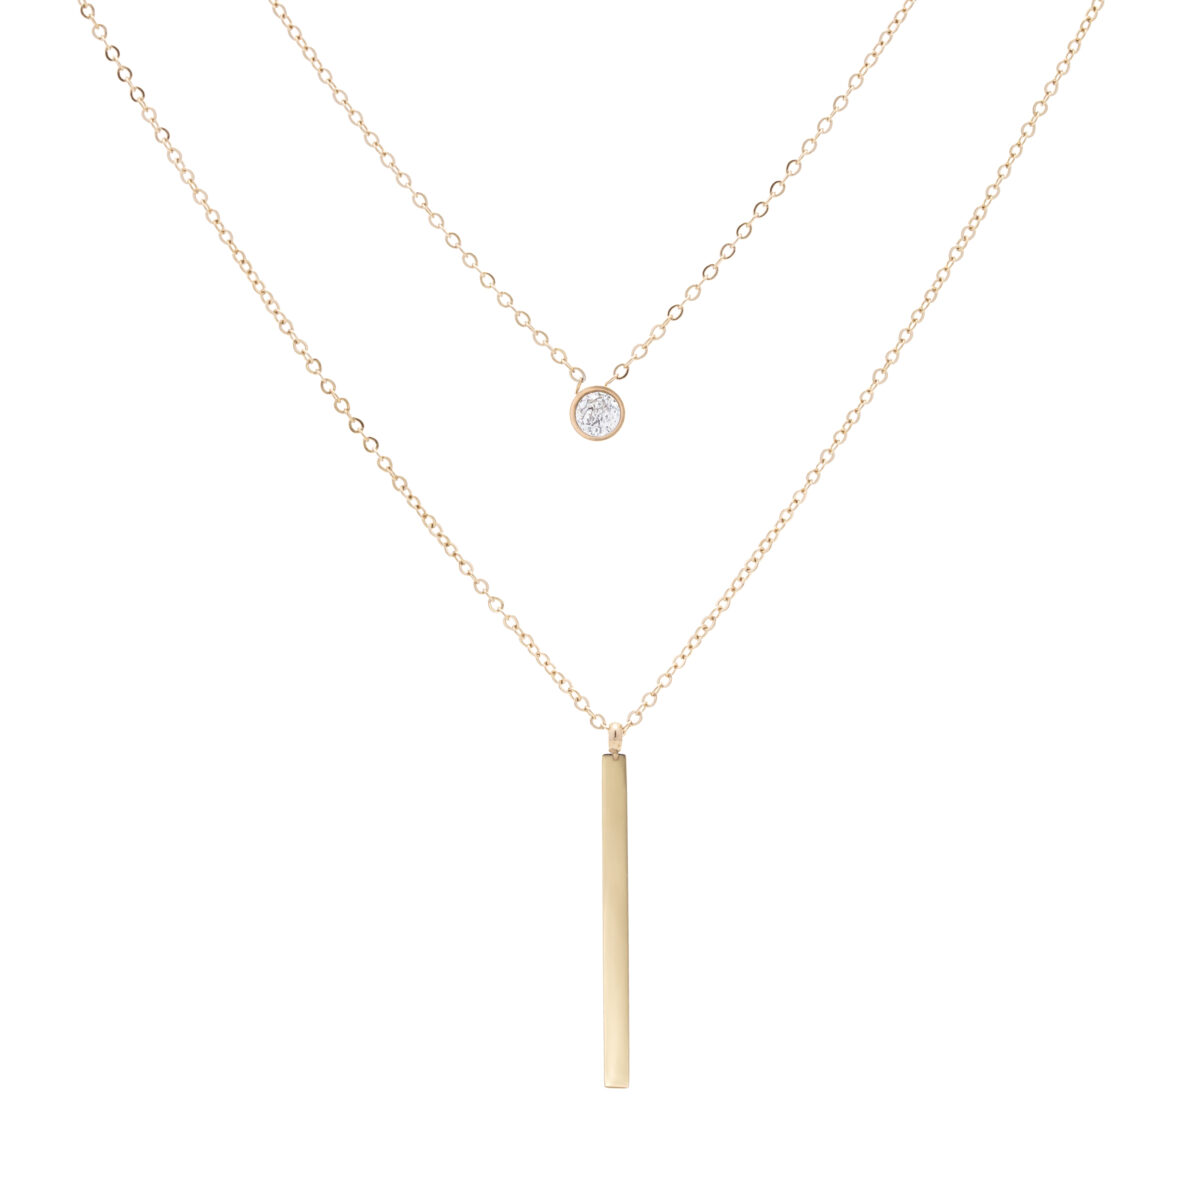 https://m.clubbella.co/product/solitaire-bar-necklace-2/ SOLITAIRE BAR NECKLACE (2)